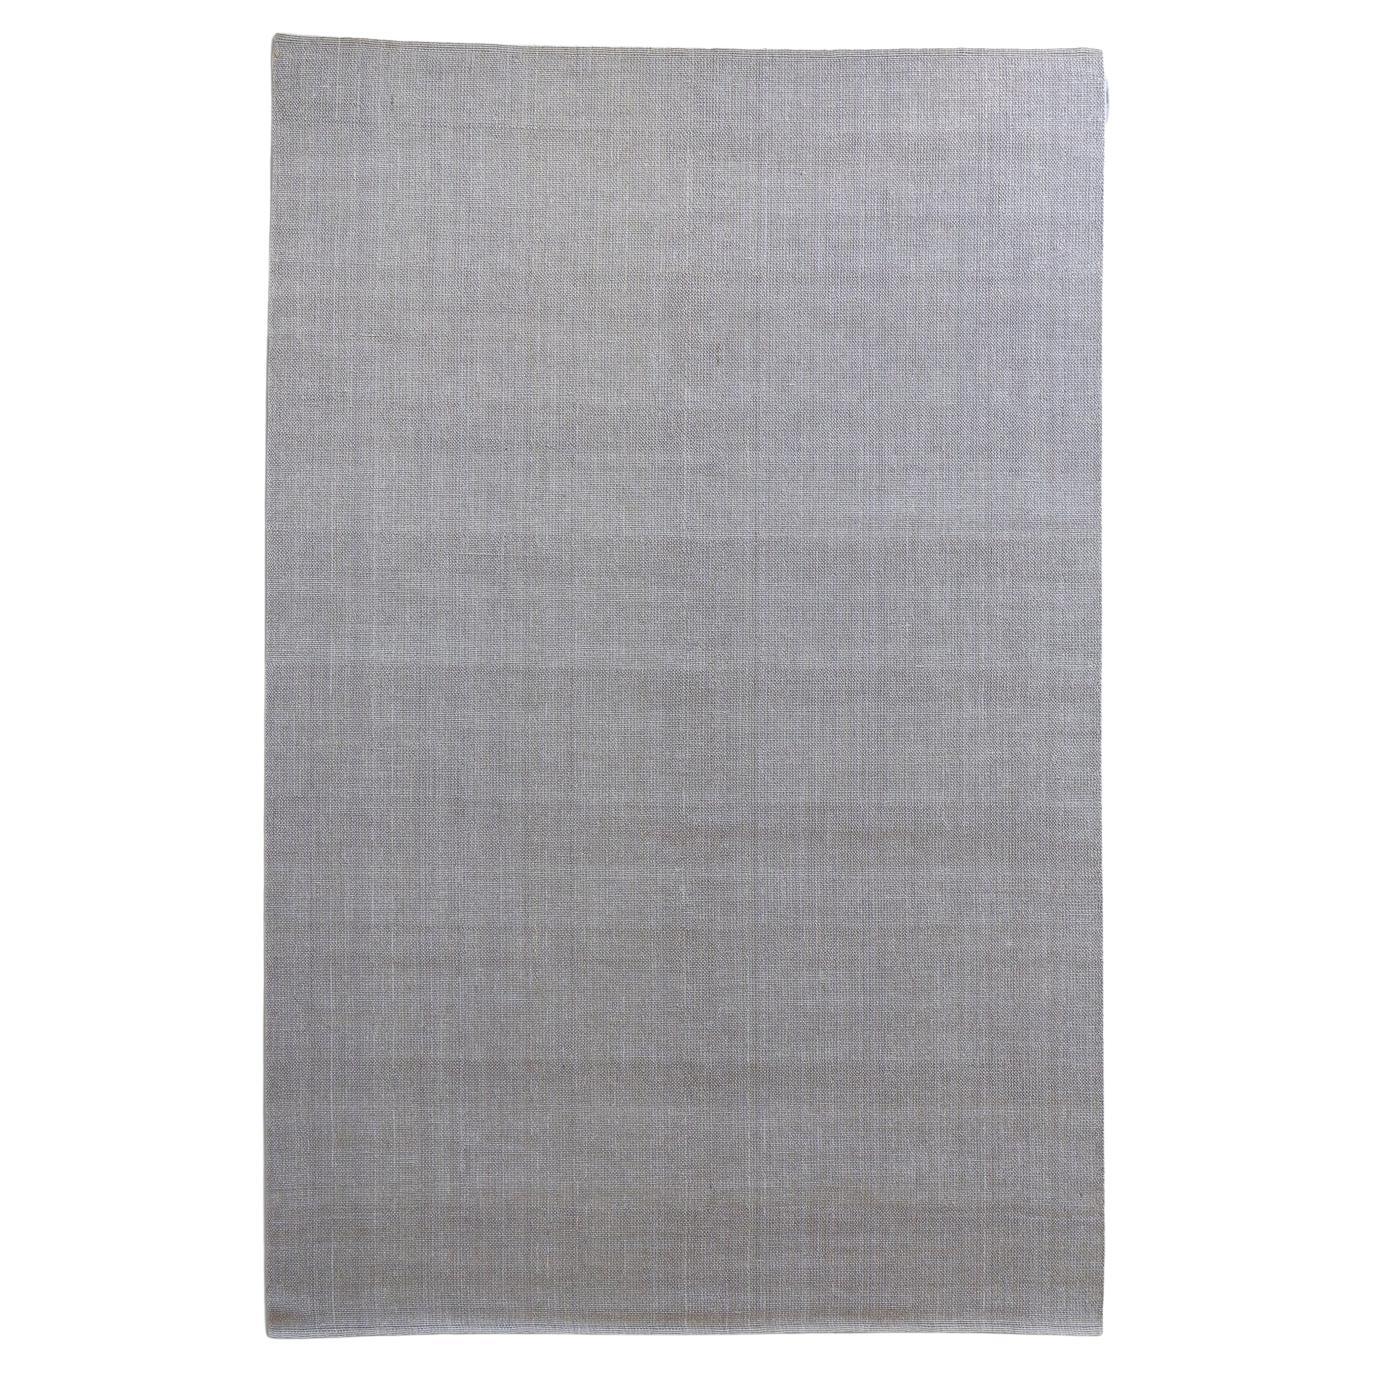 Contemporary Functional Design Grey Rug by Deanna Comellini In Stock 250x350 cm